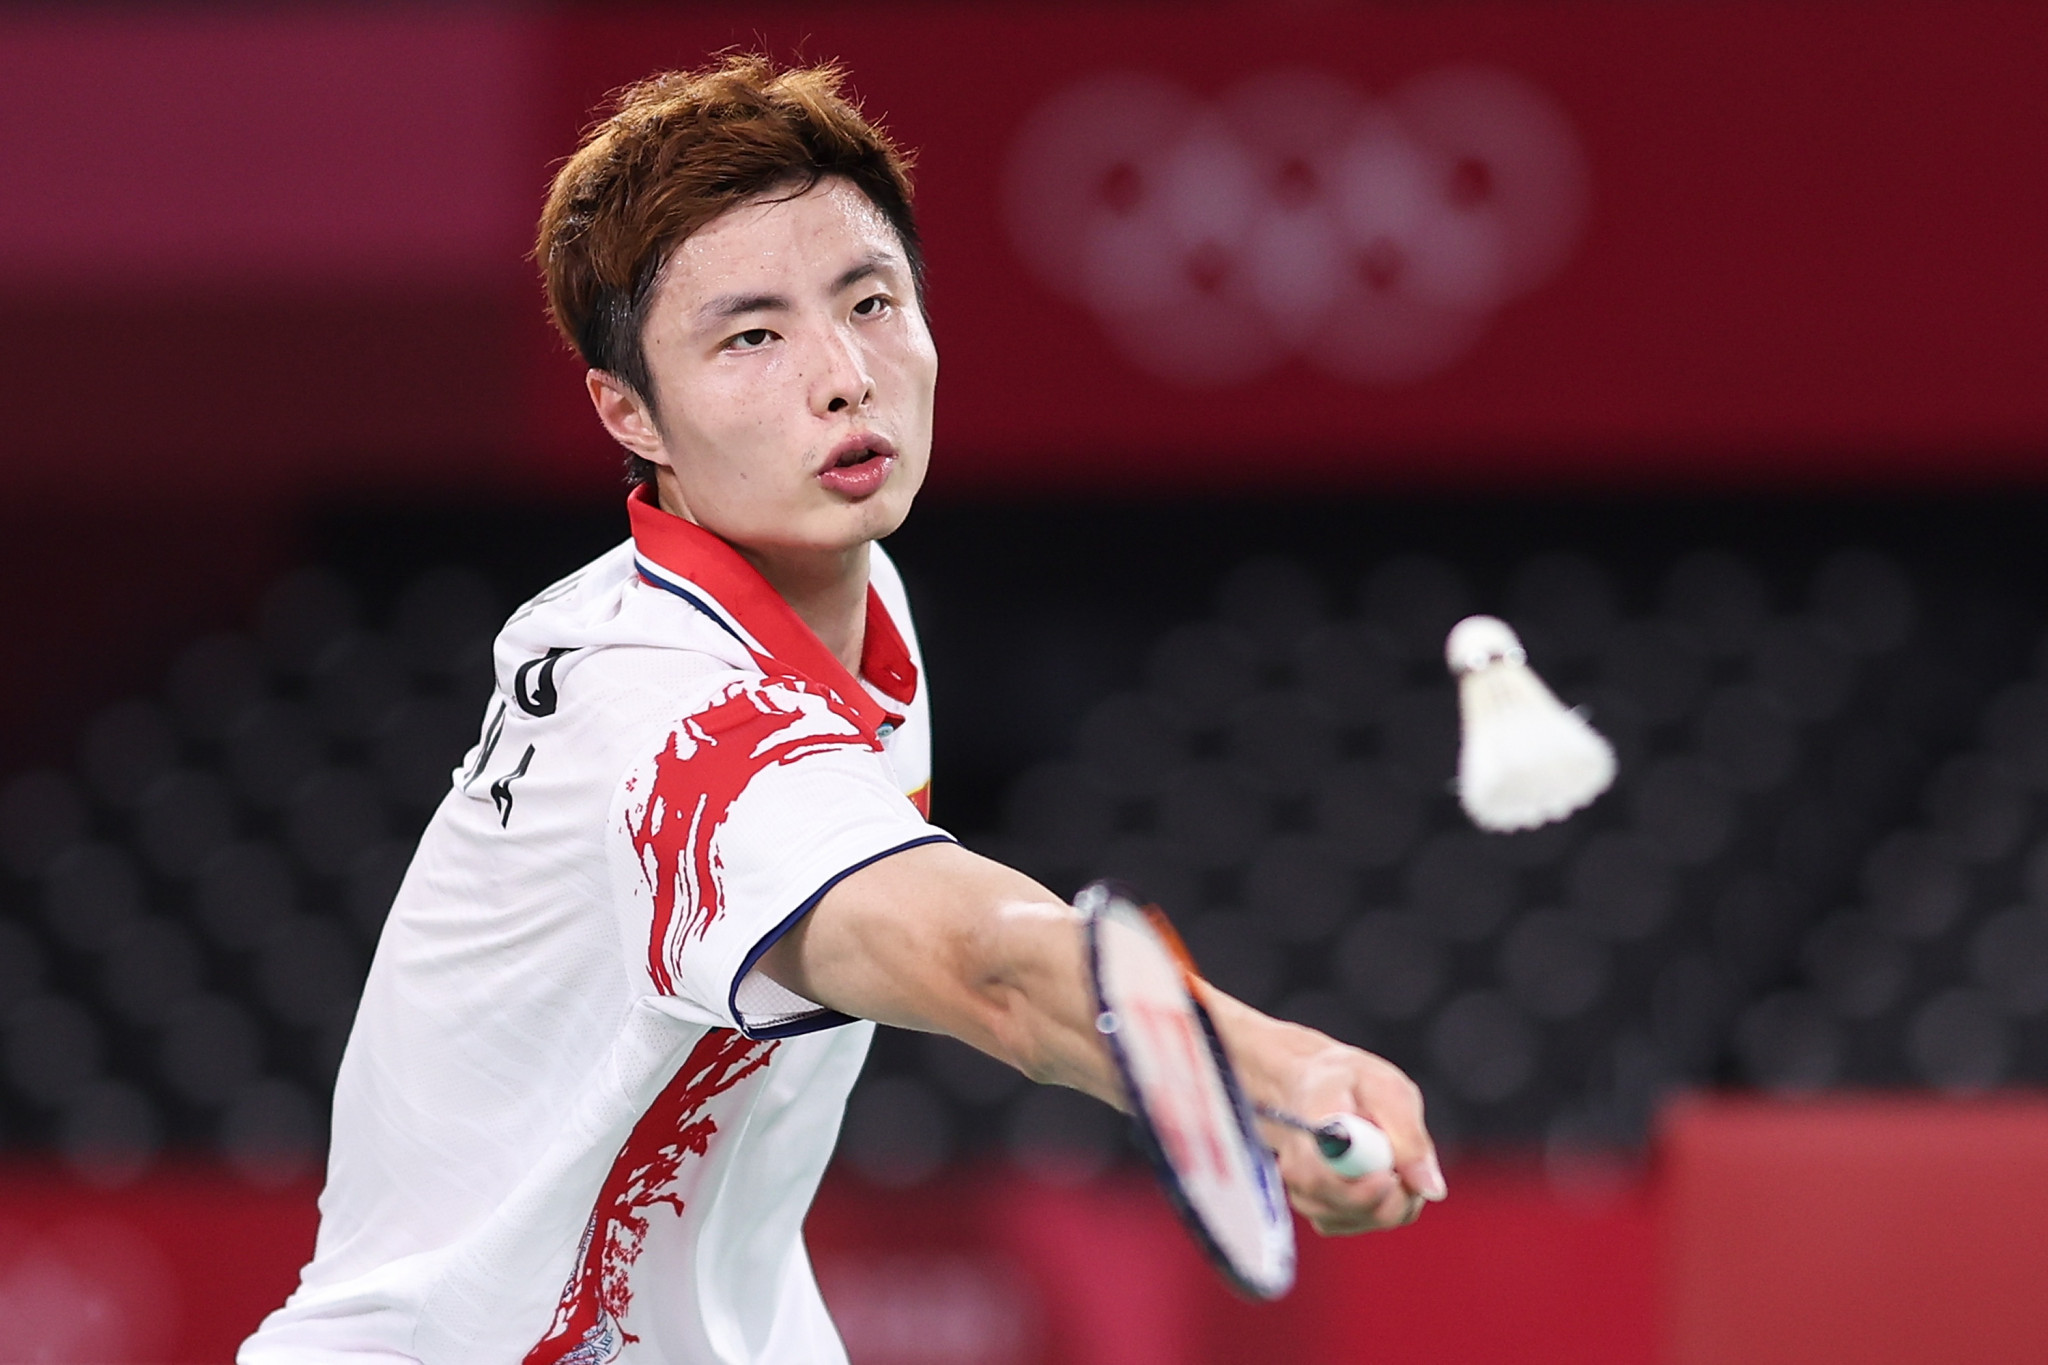 Holders China win second match at Sudirman Cup as Japan win opener